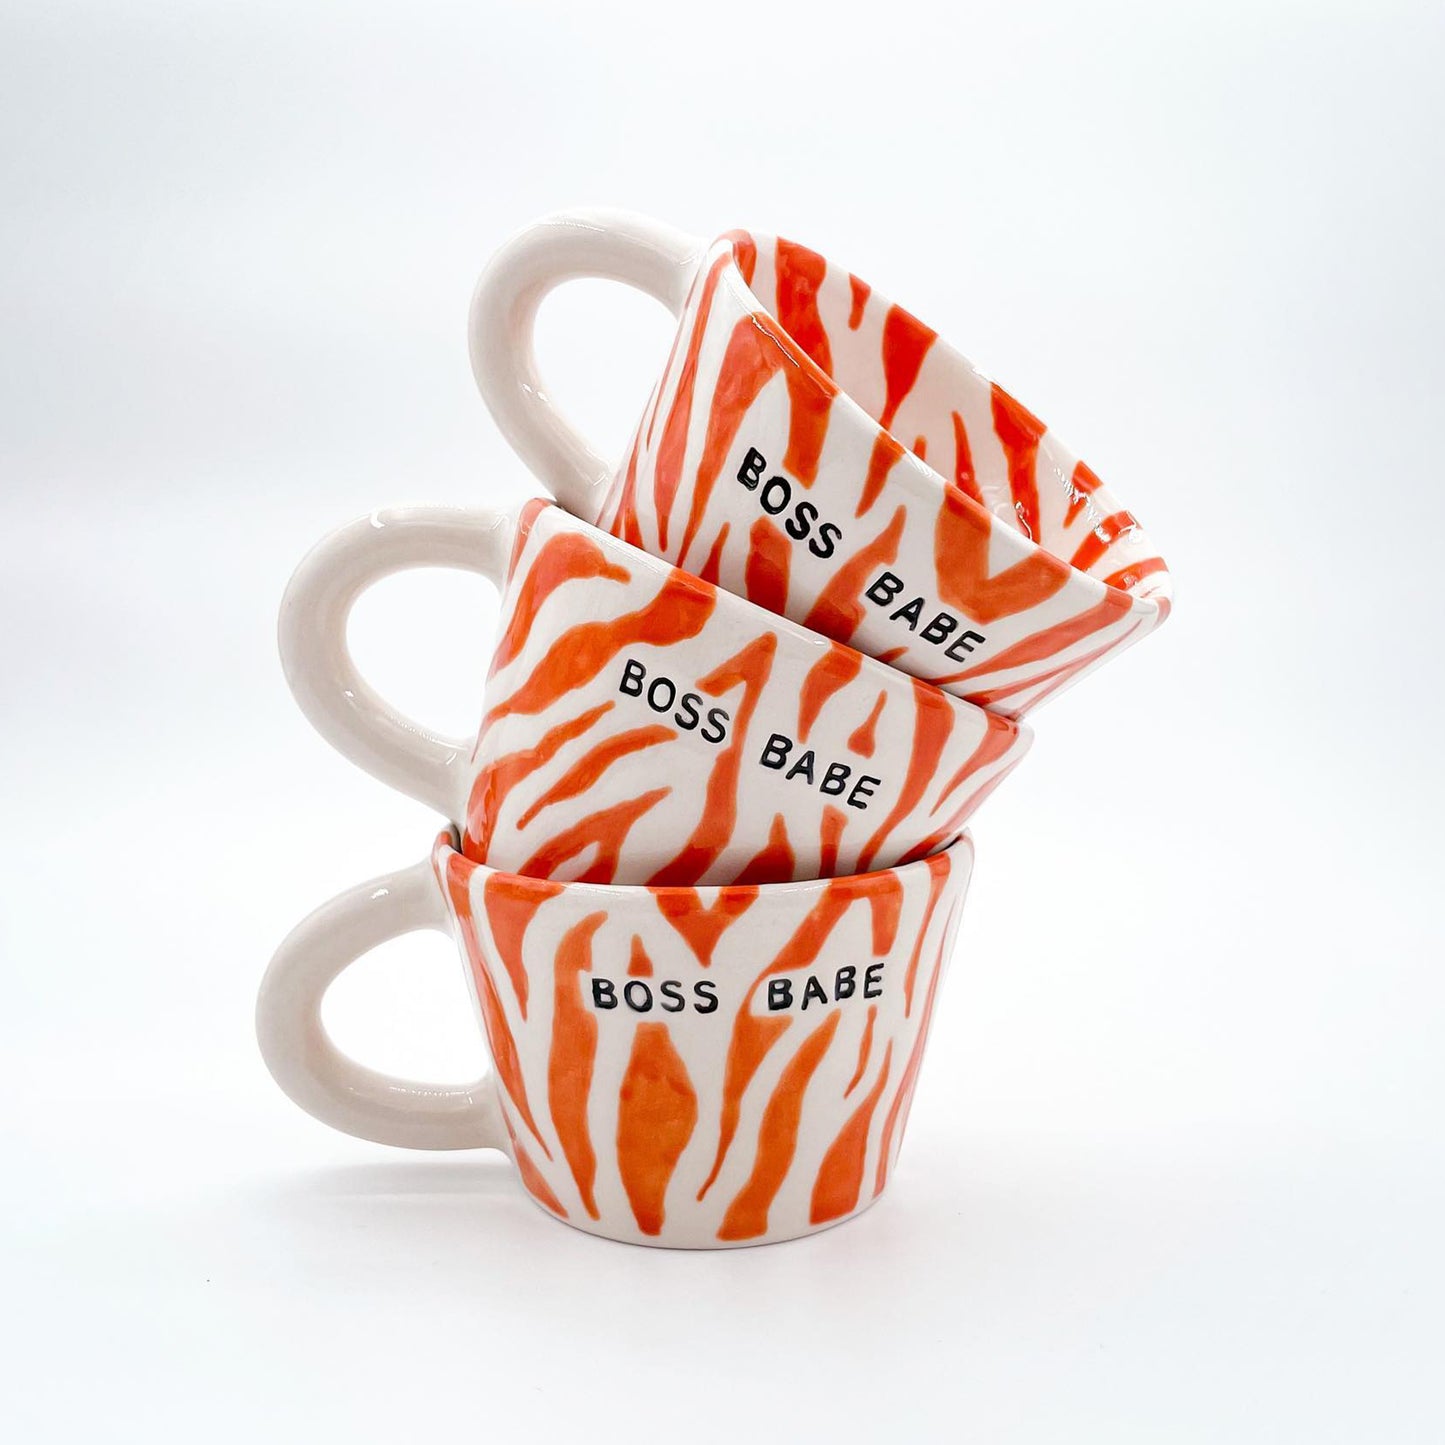 Boss Babe Cup by Velart